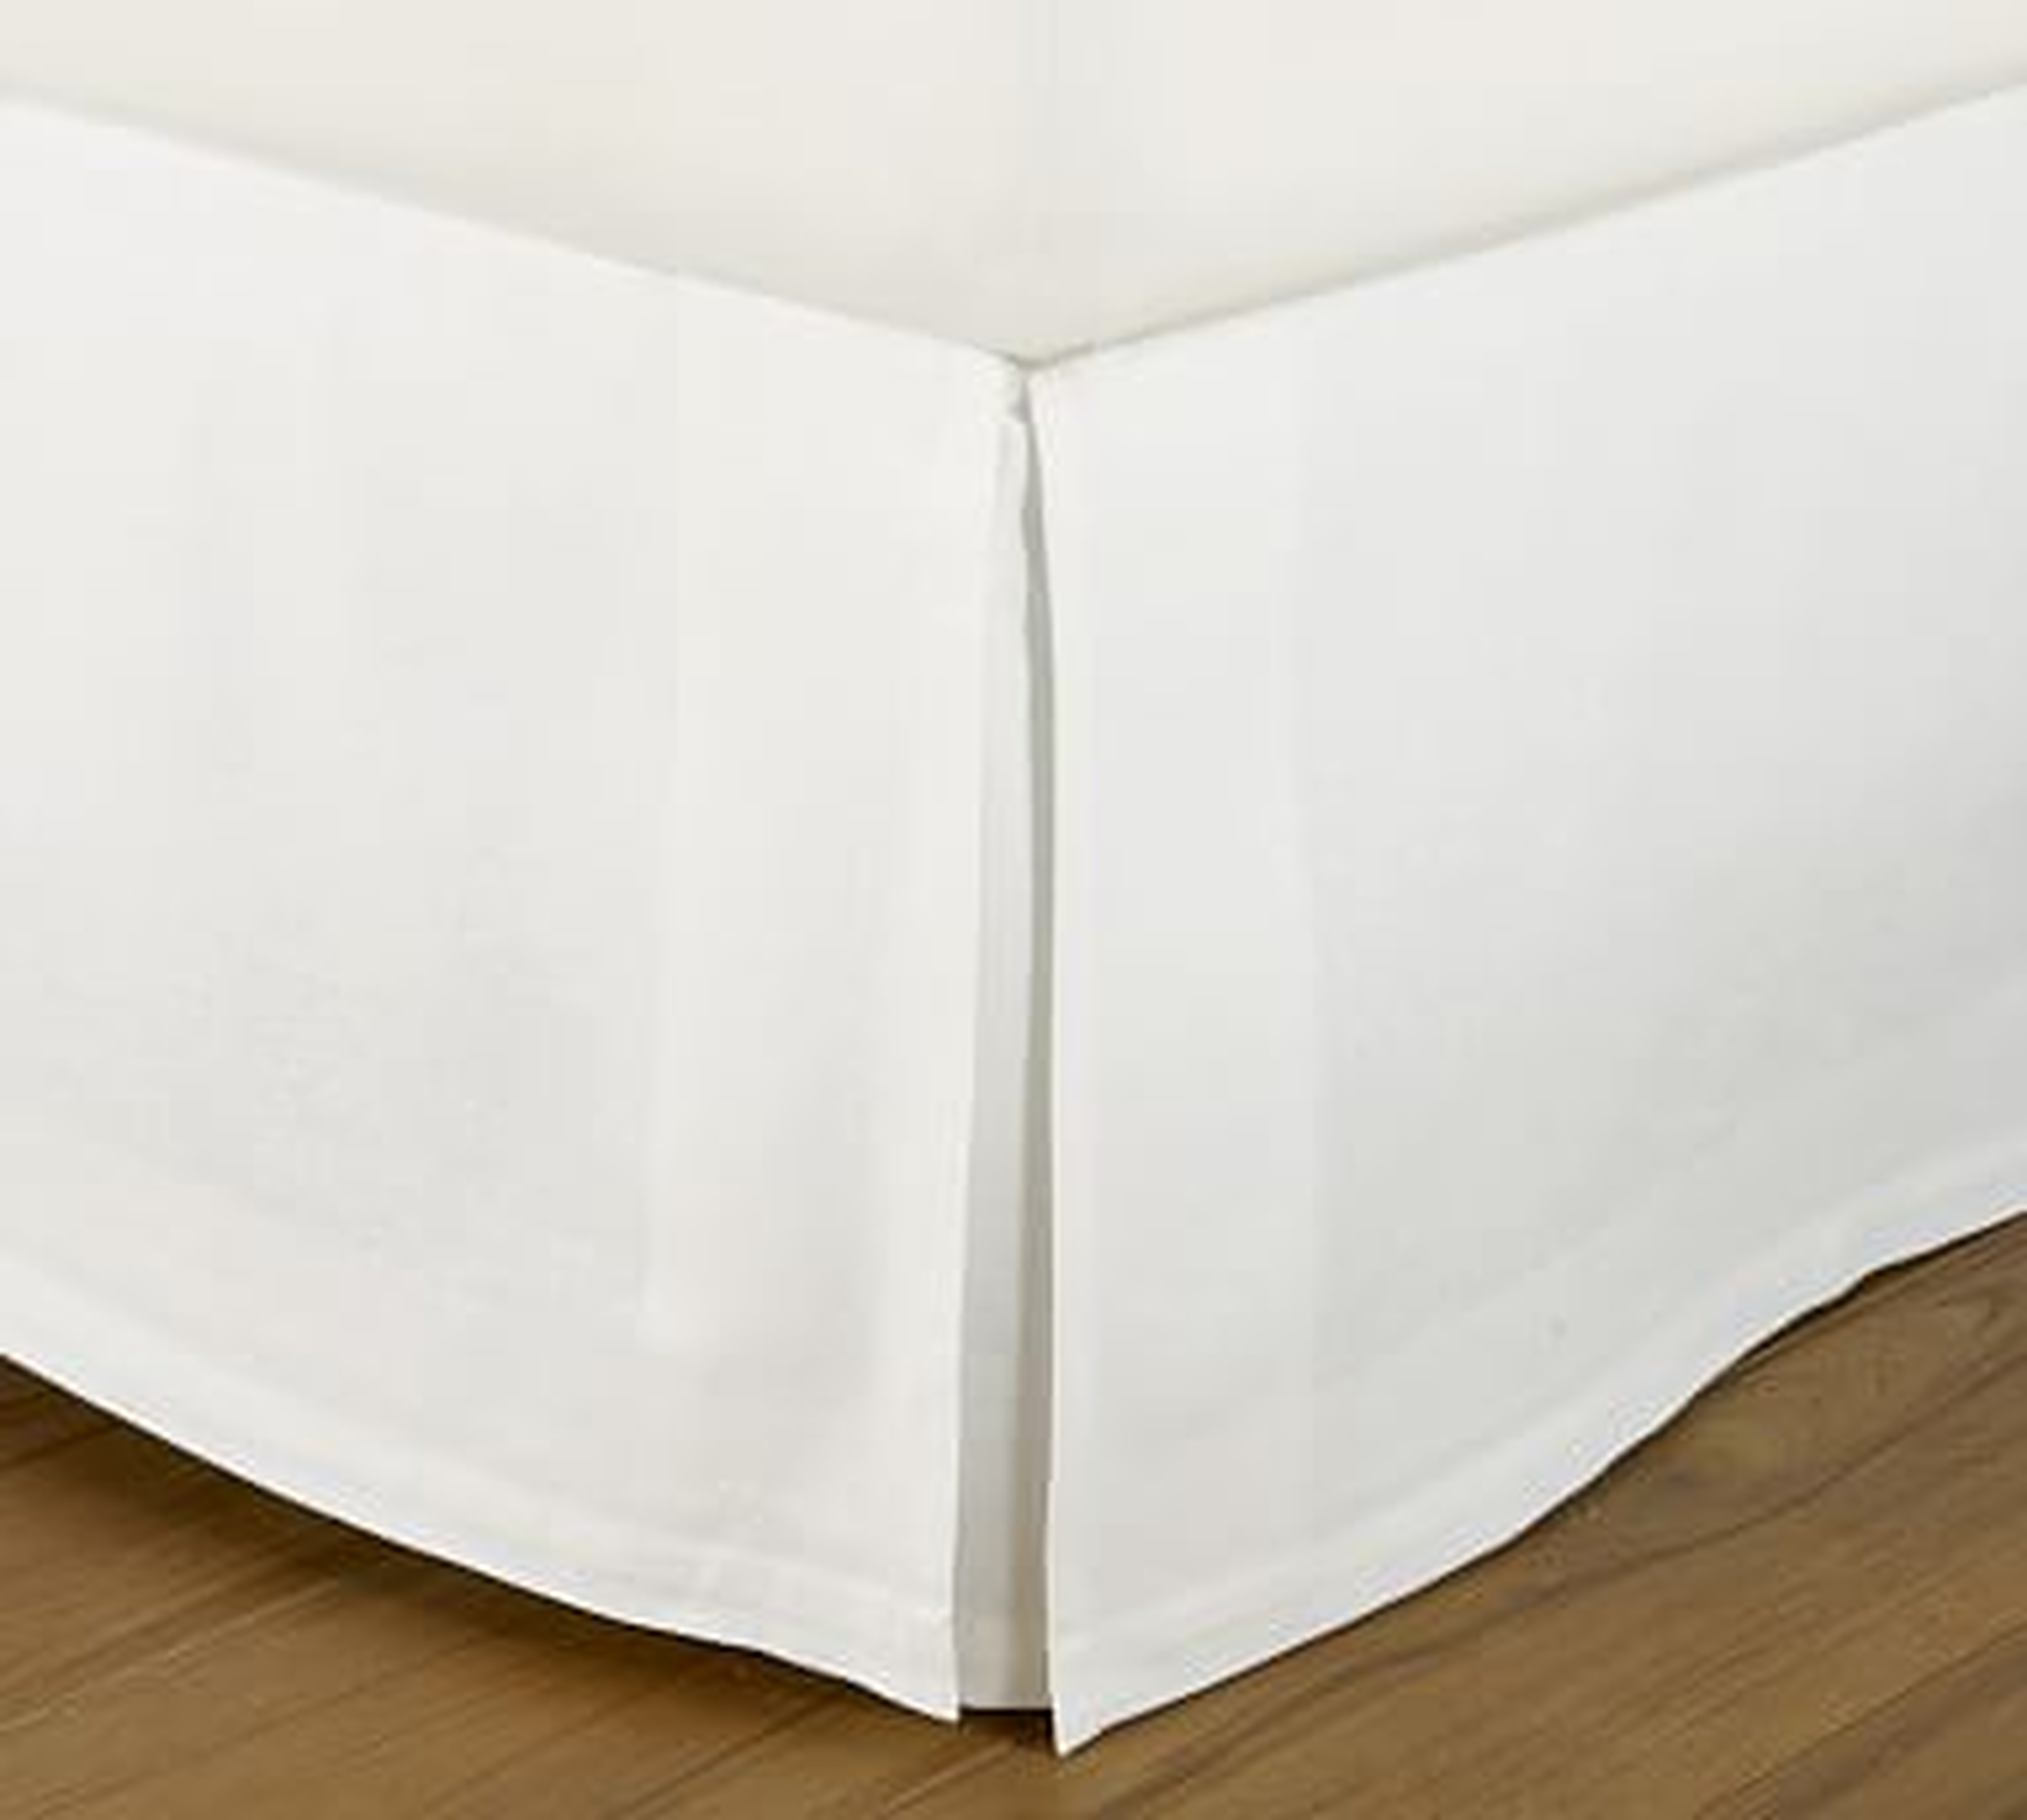 Essential Linen & Cotton Bed Skirt, 14" Drop, Queen, White - Pottery Barn